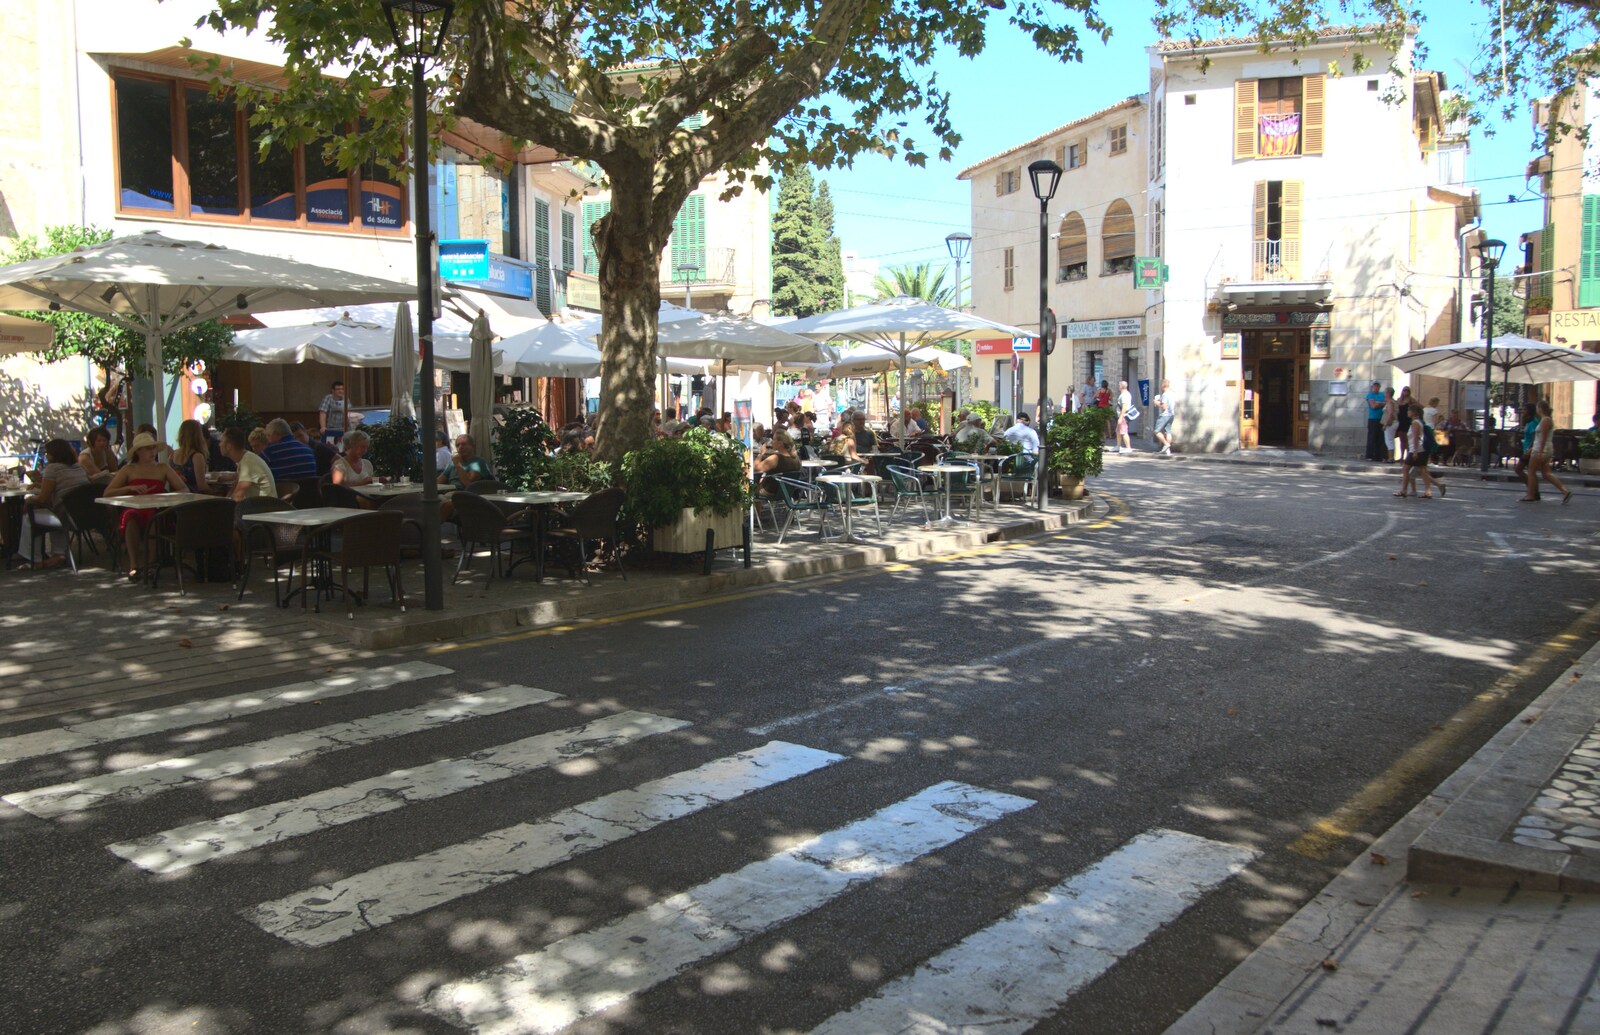 Sóller's square from A Tram Trip to Port Soller, Mallorca - 18th August 2011